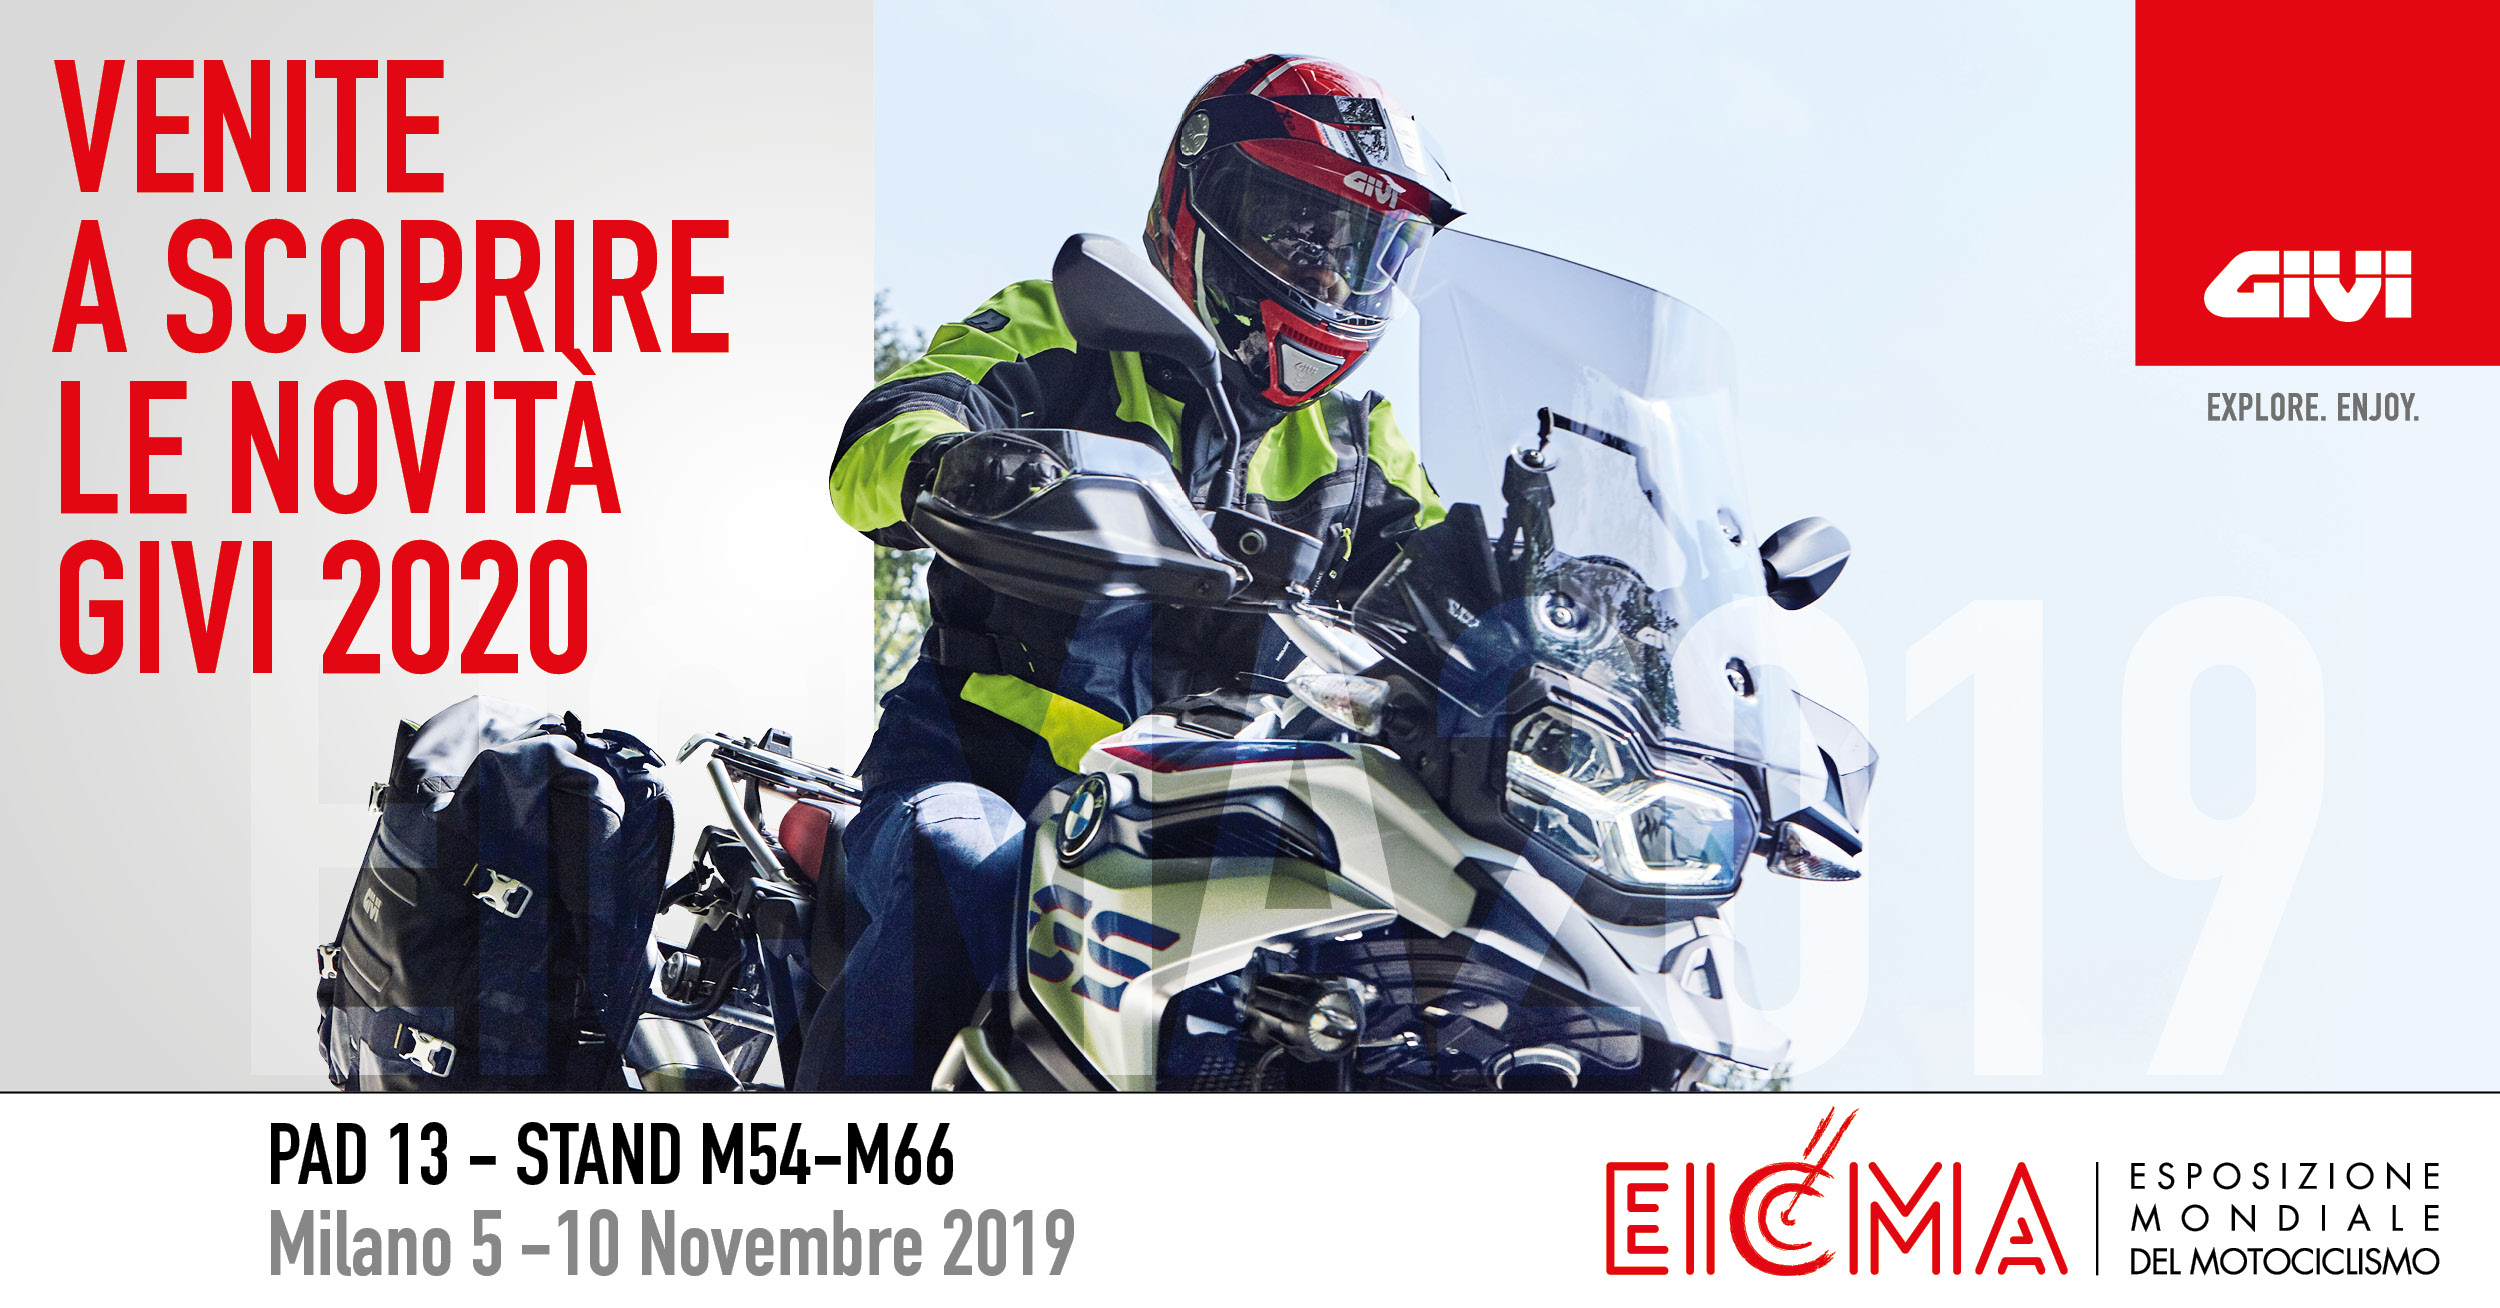 GIVI+is+getting+ready+for+EICMA+with+big+news+and+amazing+guests%21